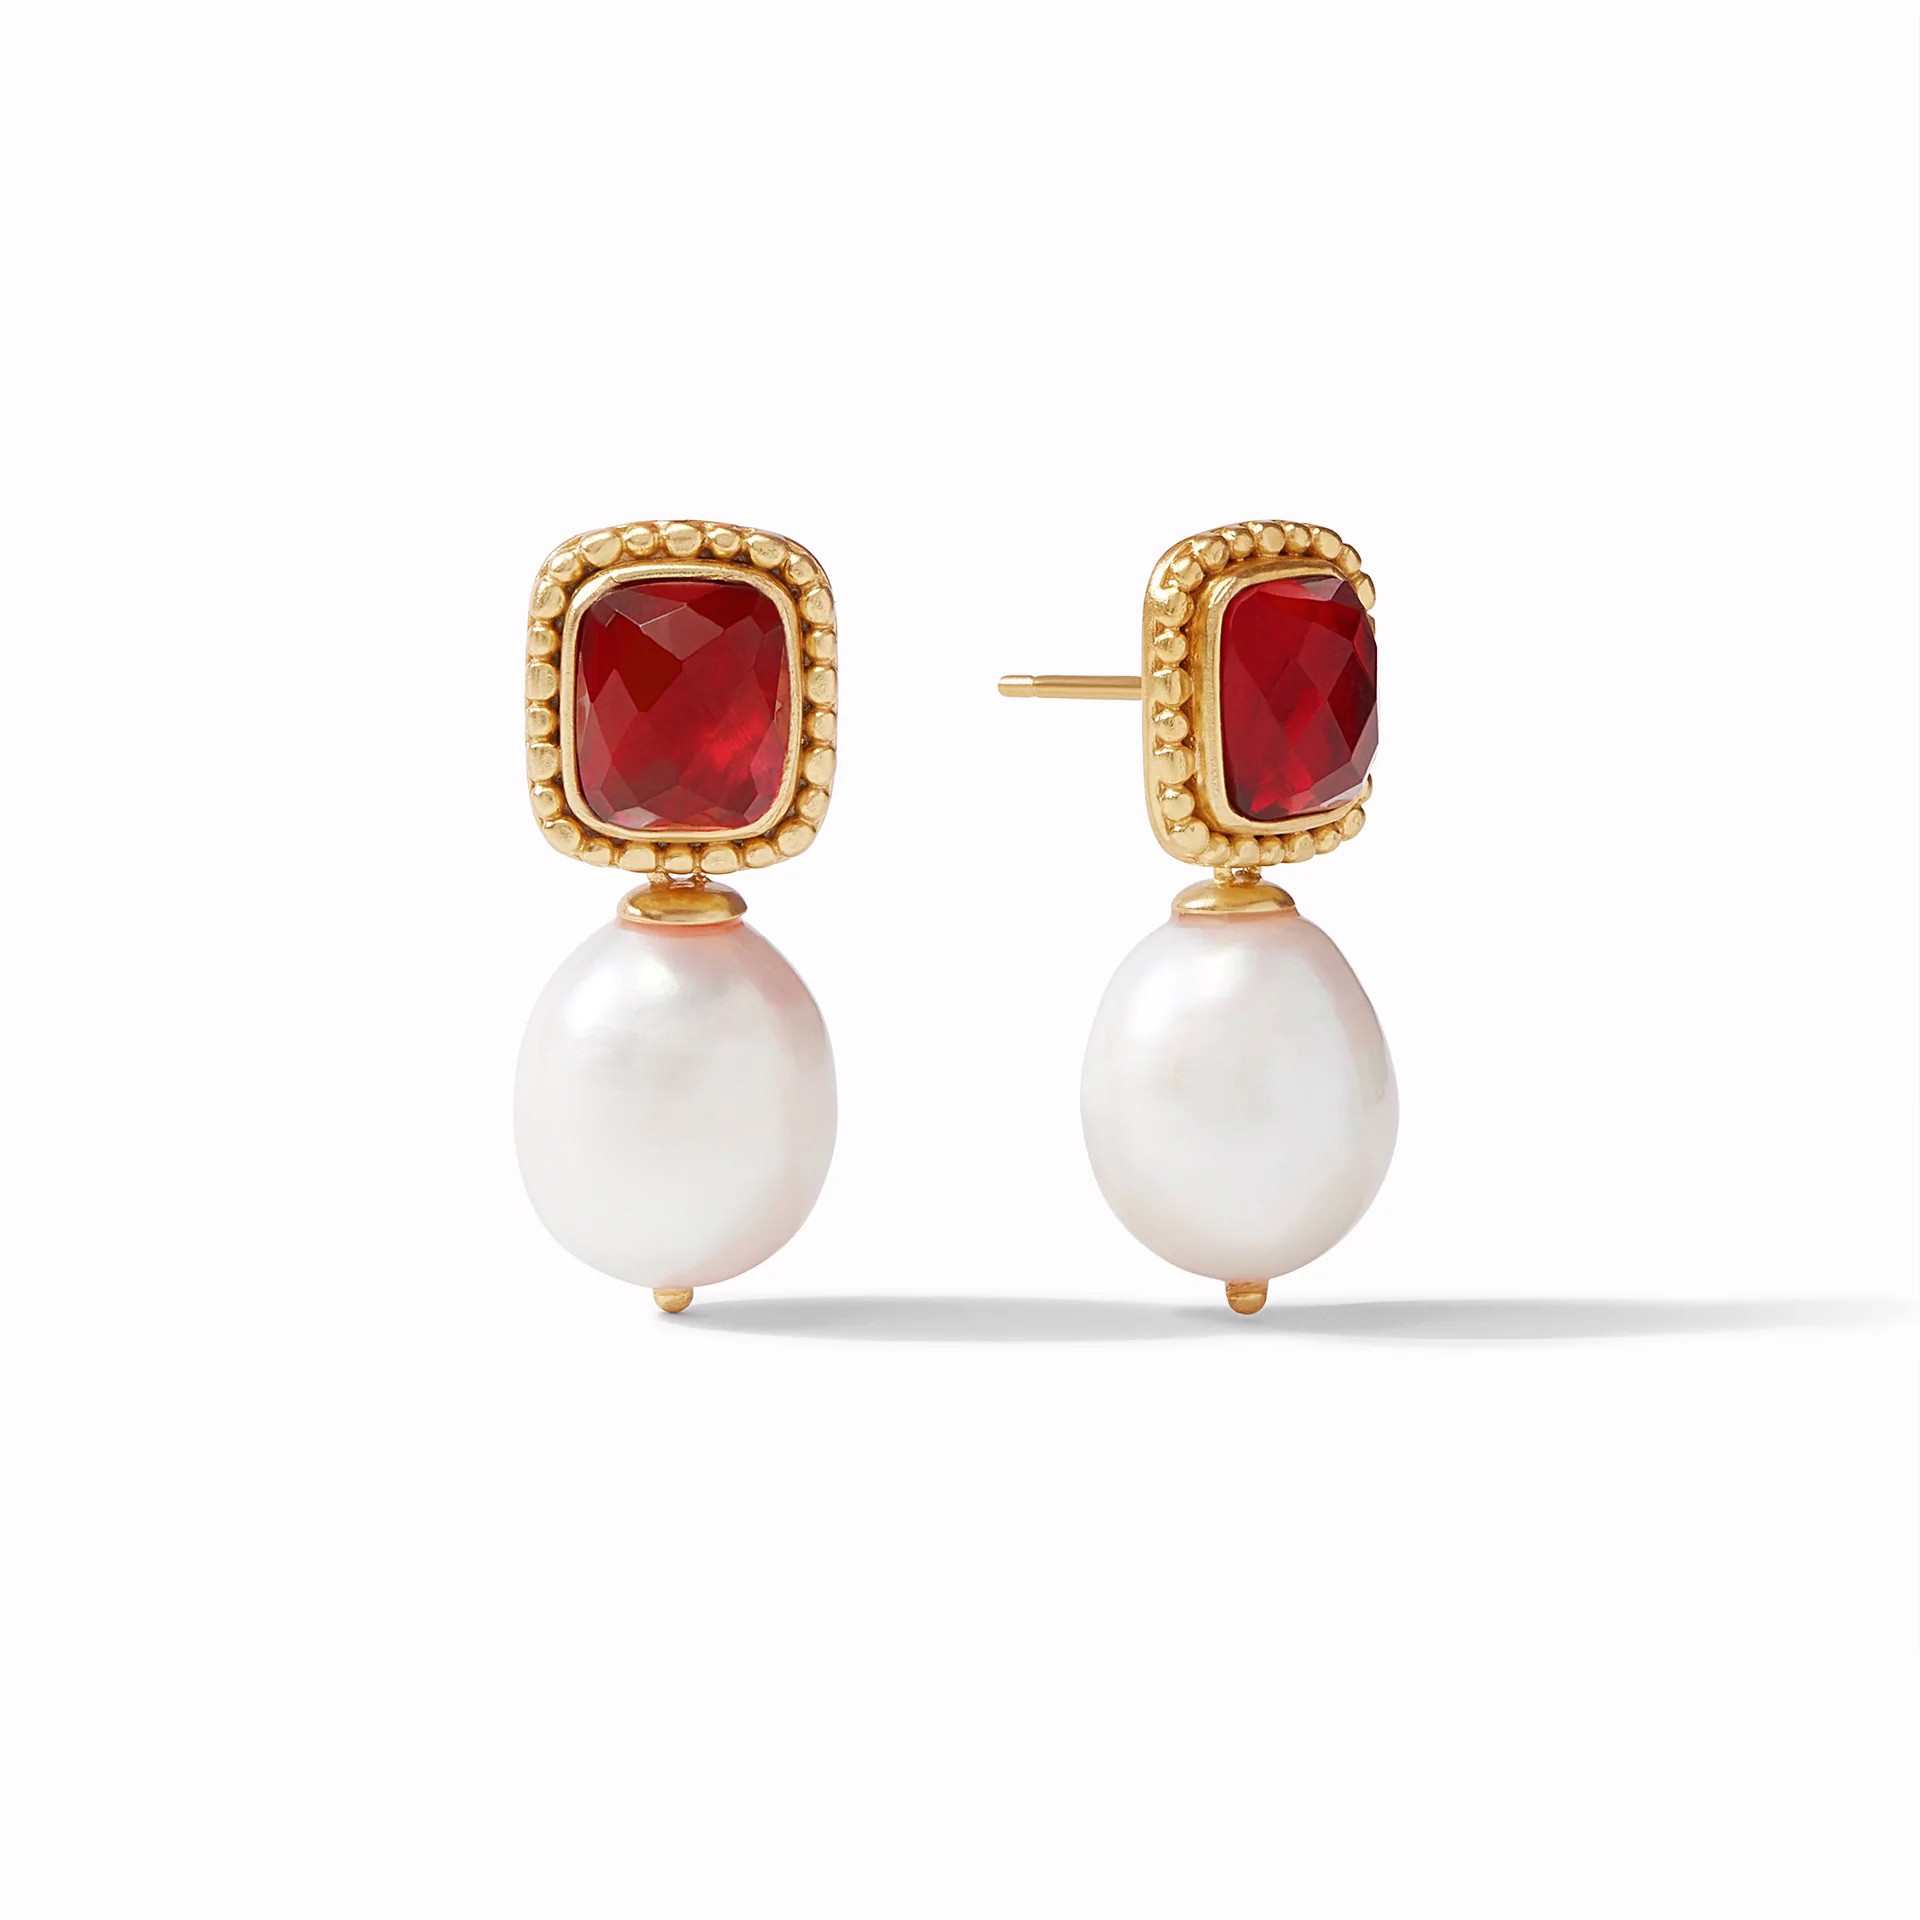 Marbella Earring - Ruby Red by Julie Vos